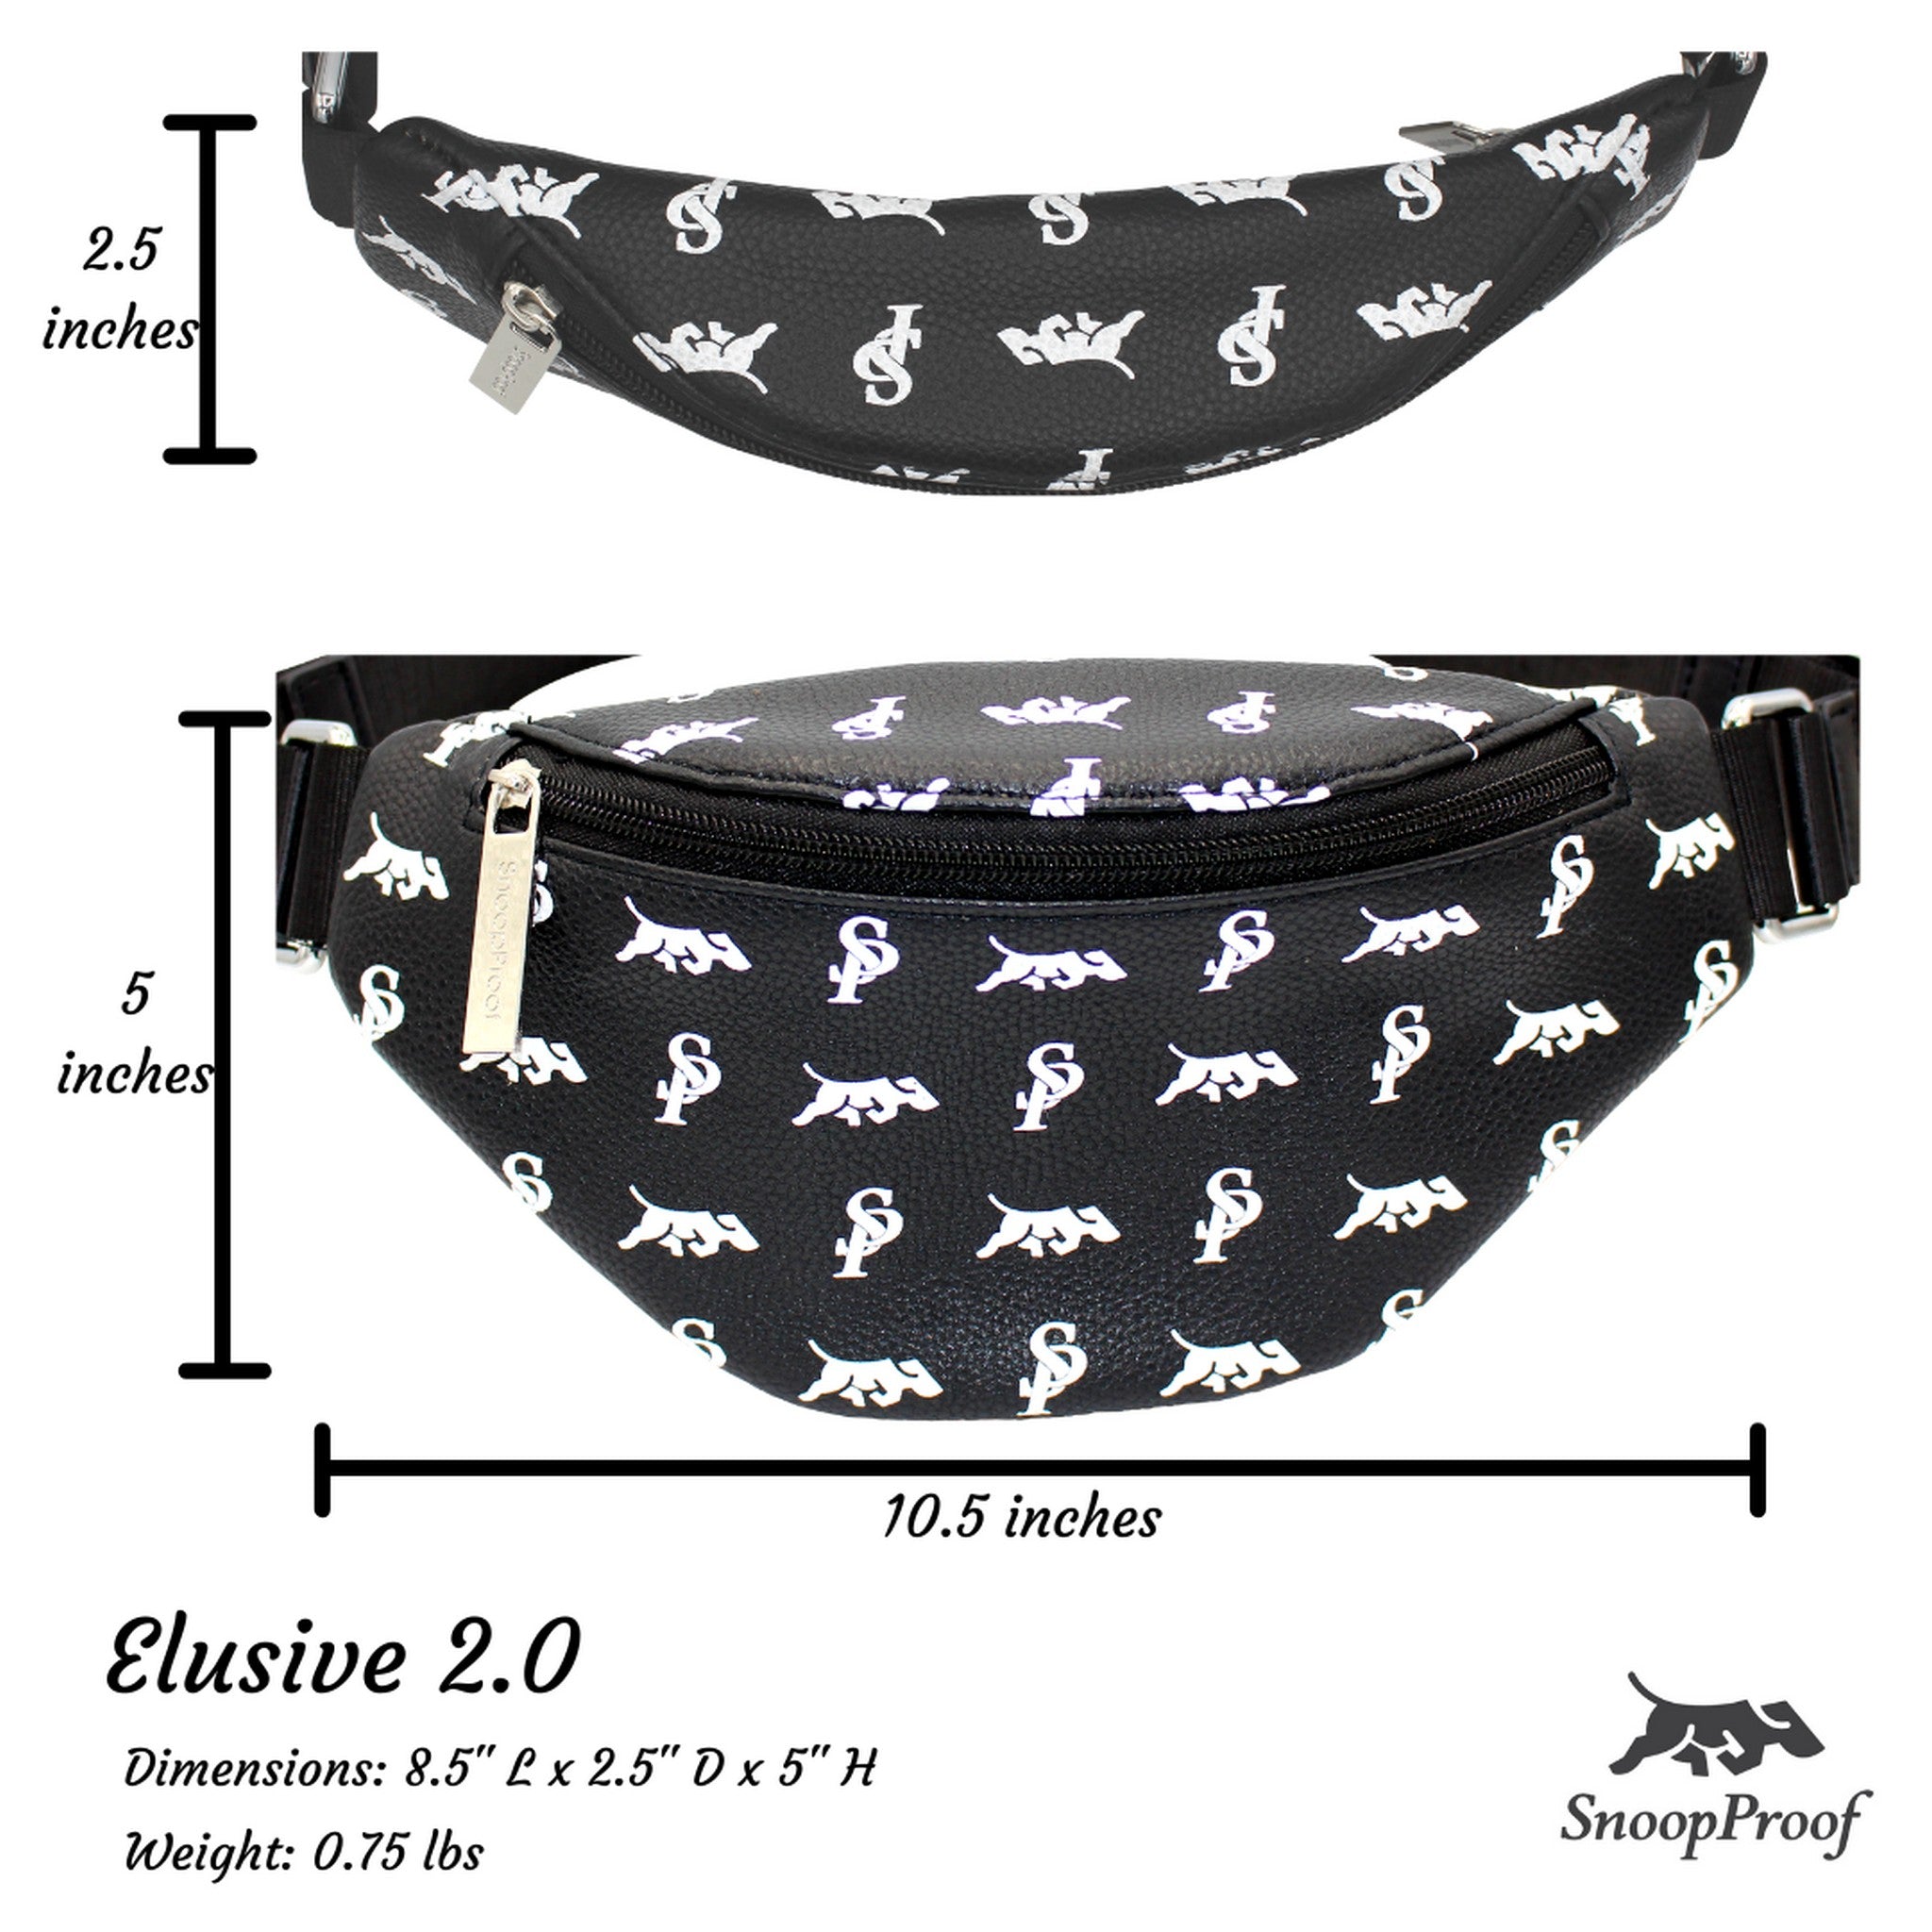 Elusive 2.0 in Black & White - Smell Proof Belt Bag-Fanny Pack-Snoopproofbags